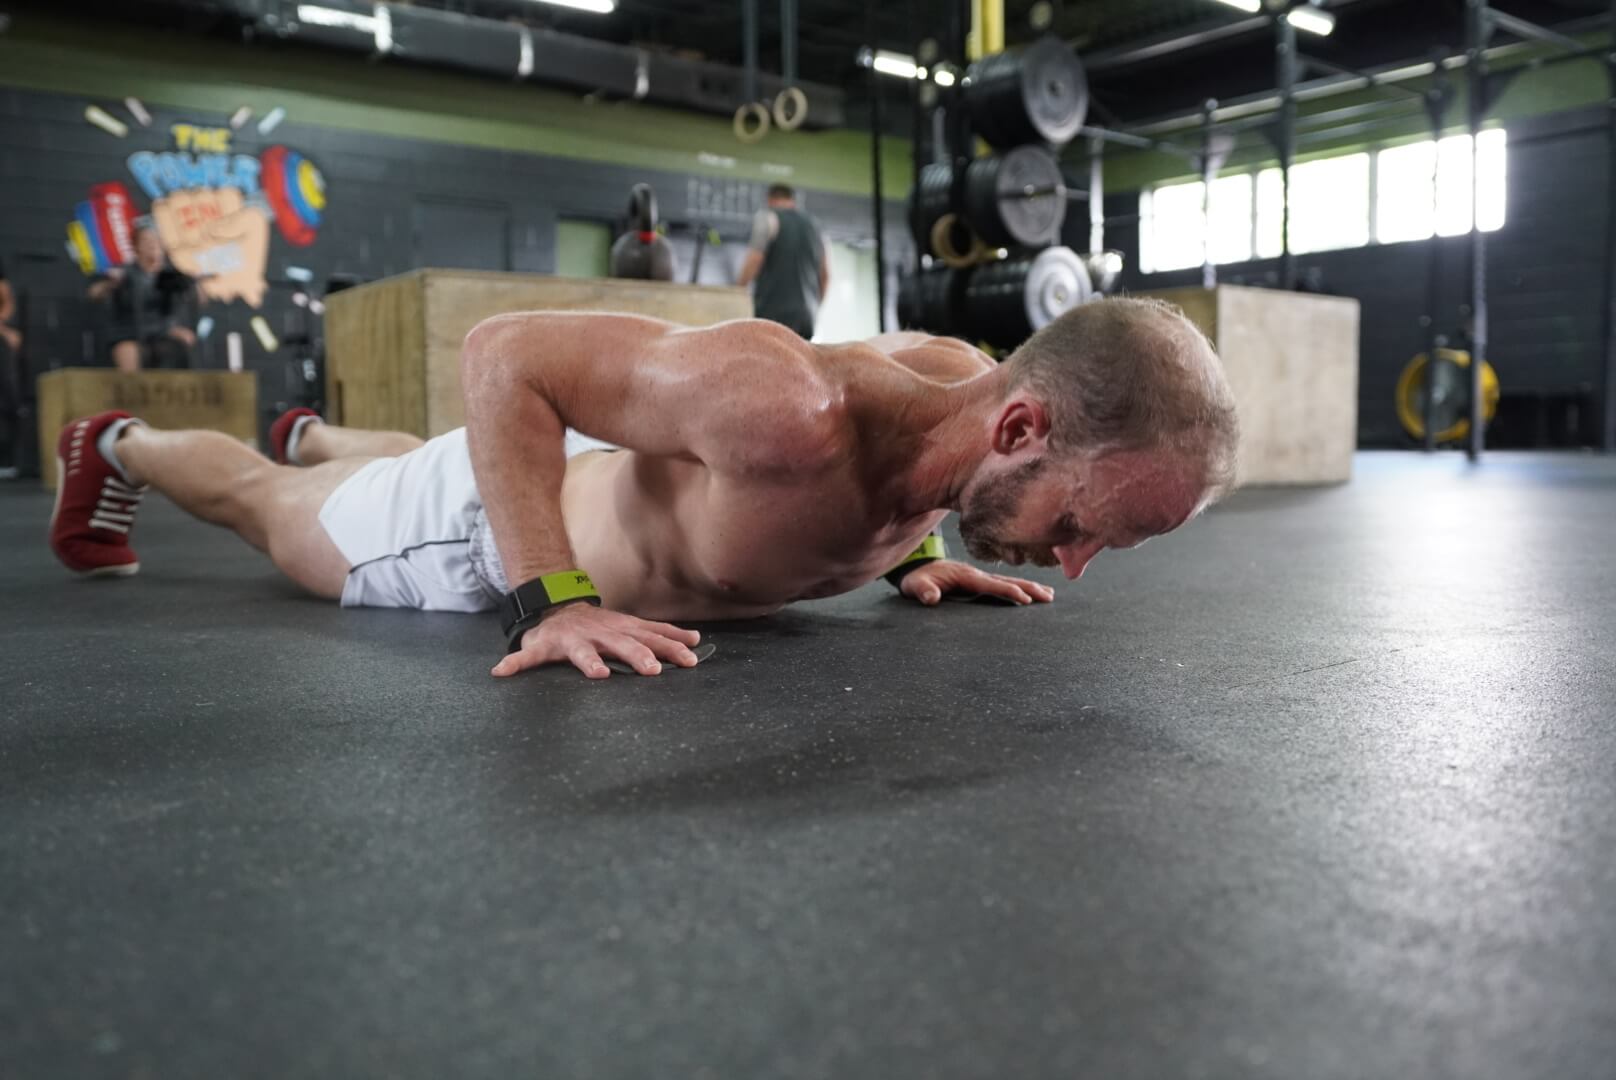 Crū Fitness gym in Ponchatoula, LA, fit co-owner Ron Pembo doing pushup in white shorts and red no bull crossfit shoes in gym